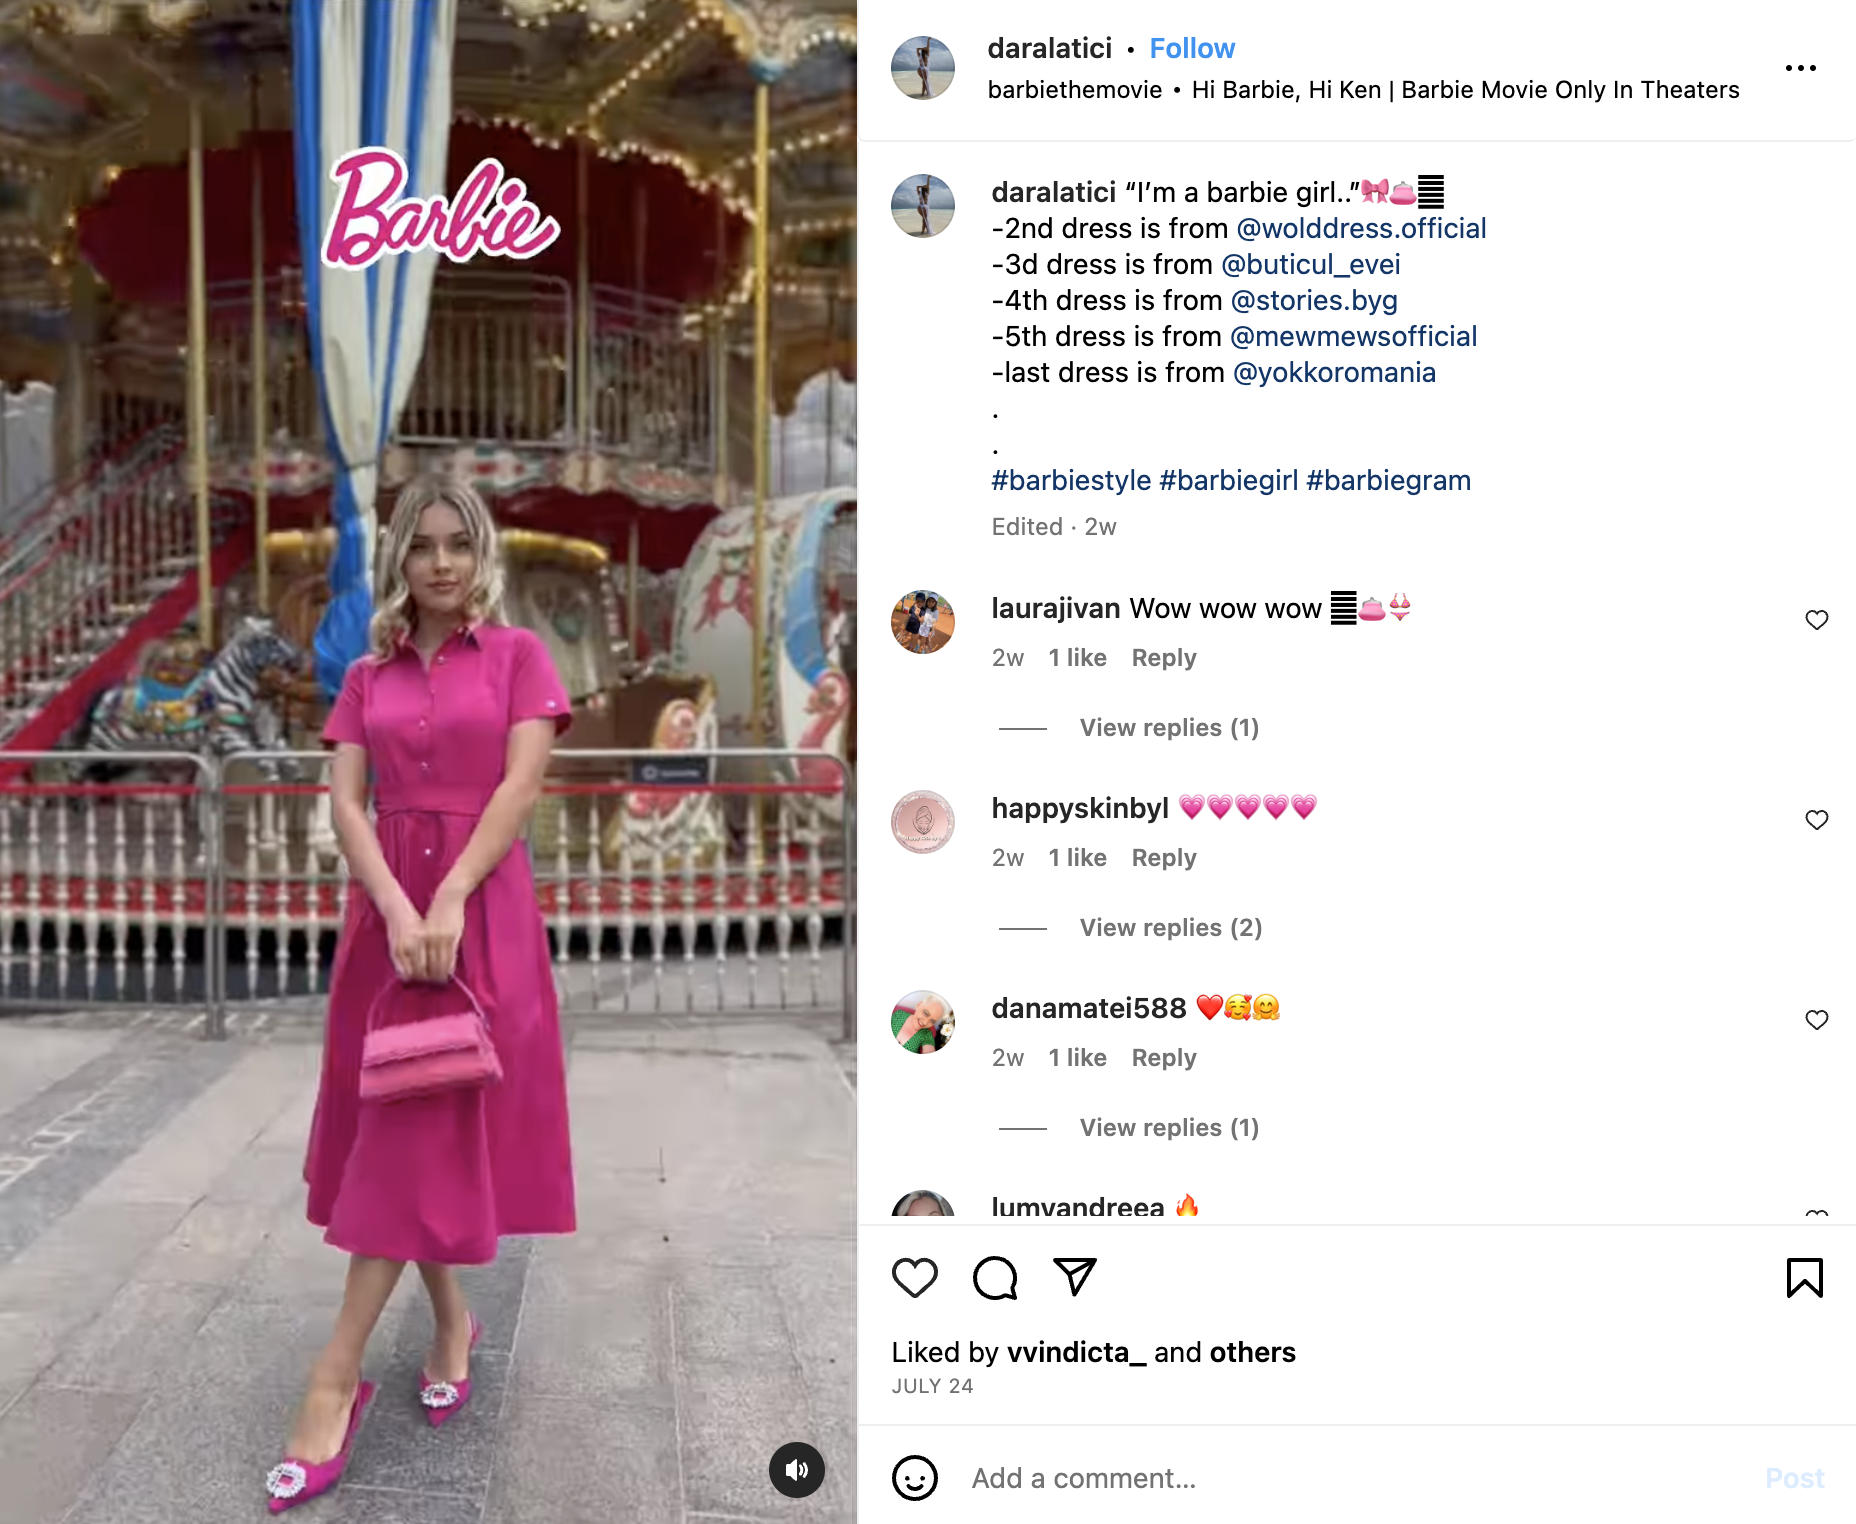 screenshot from instagram depicting a trend from the barbie movie, with a girl wearing a pink dress